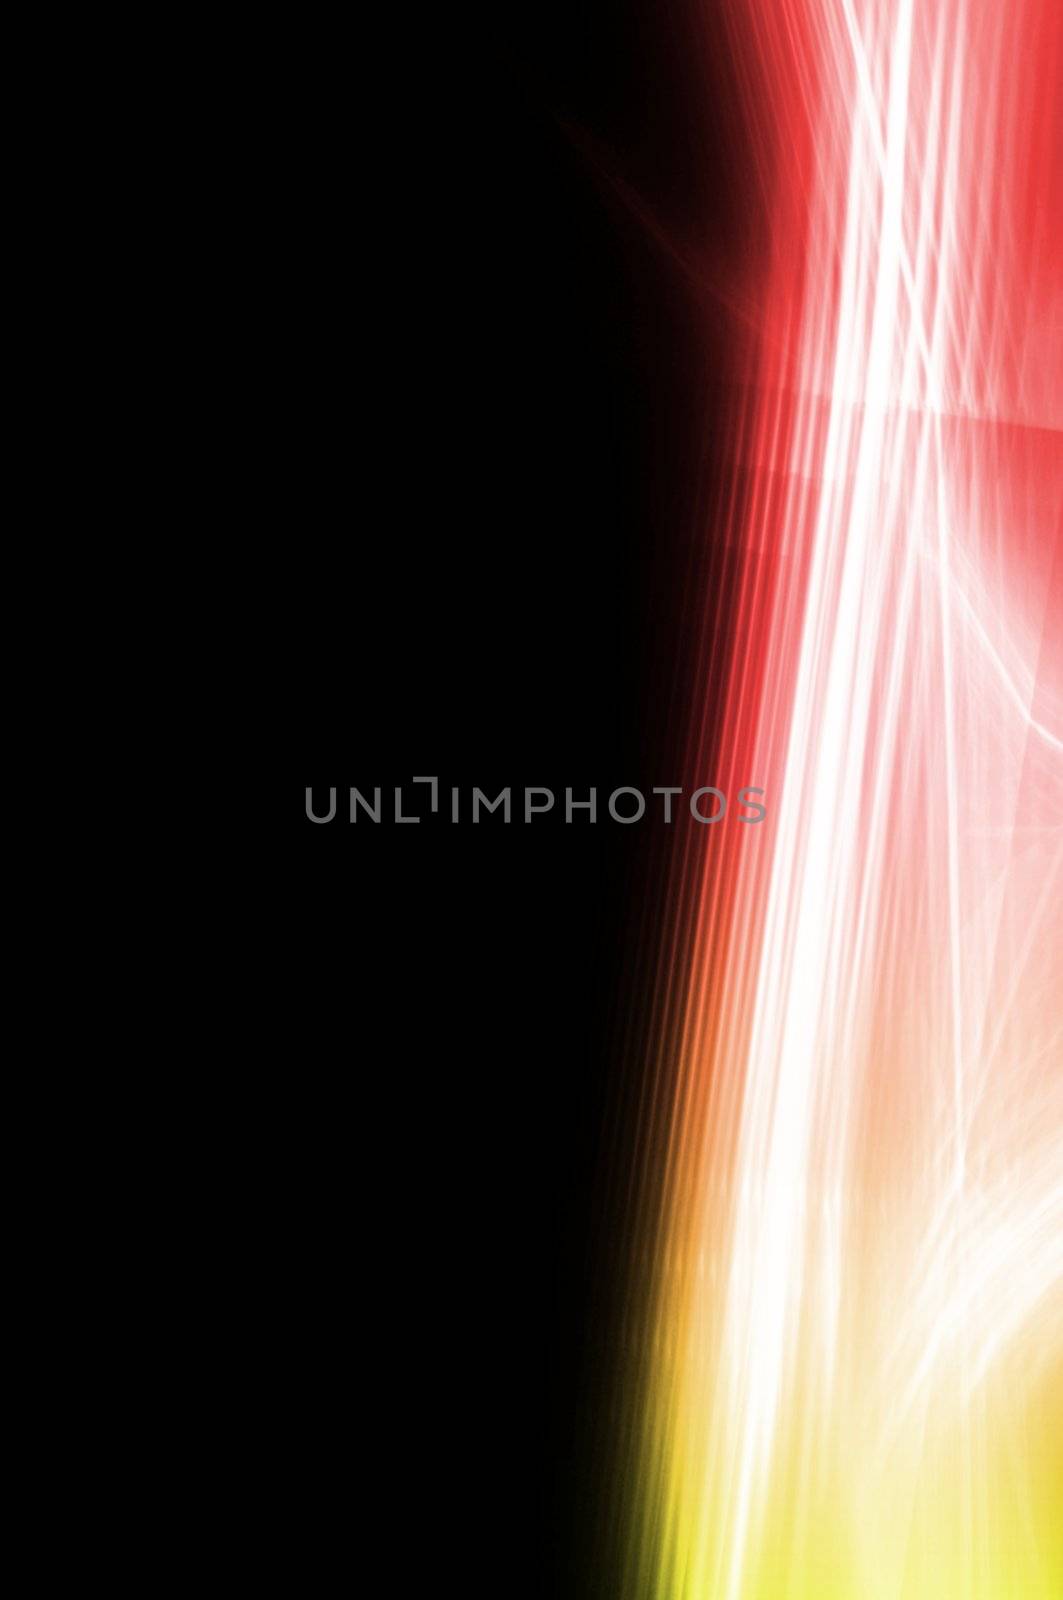 abstract fractal background wallpaper or card with copyspace